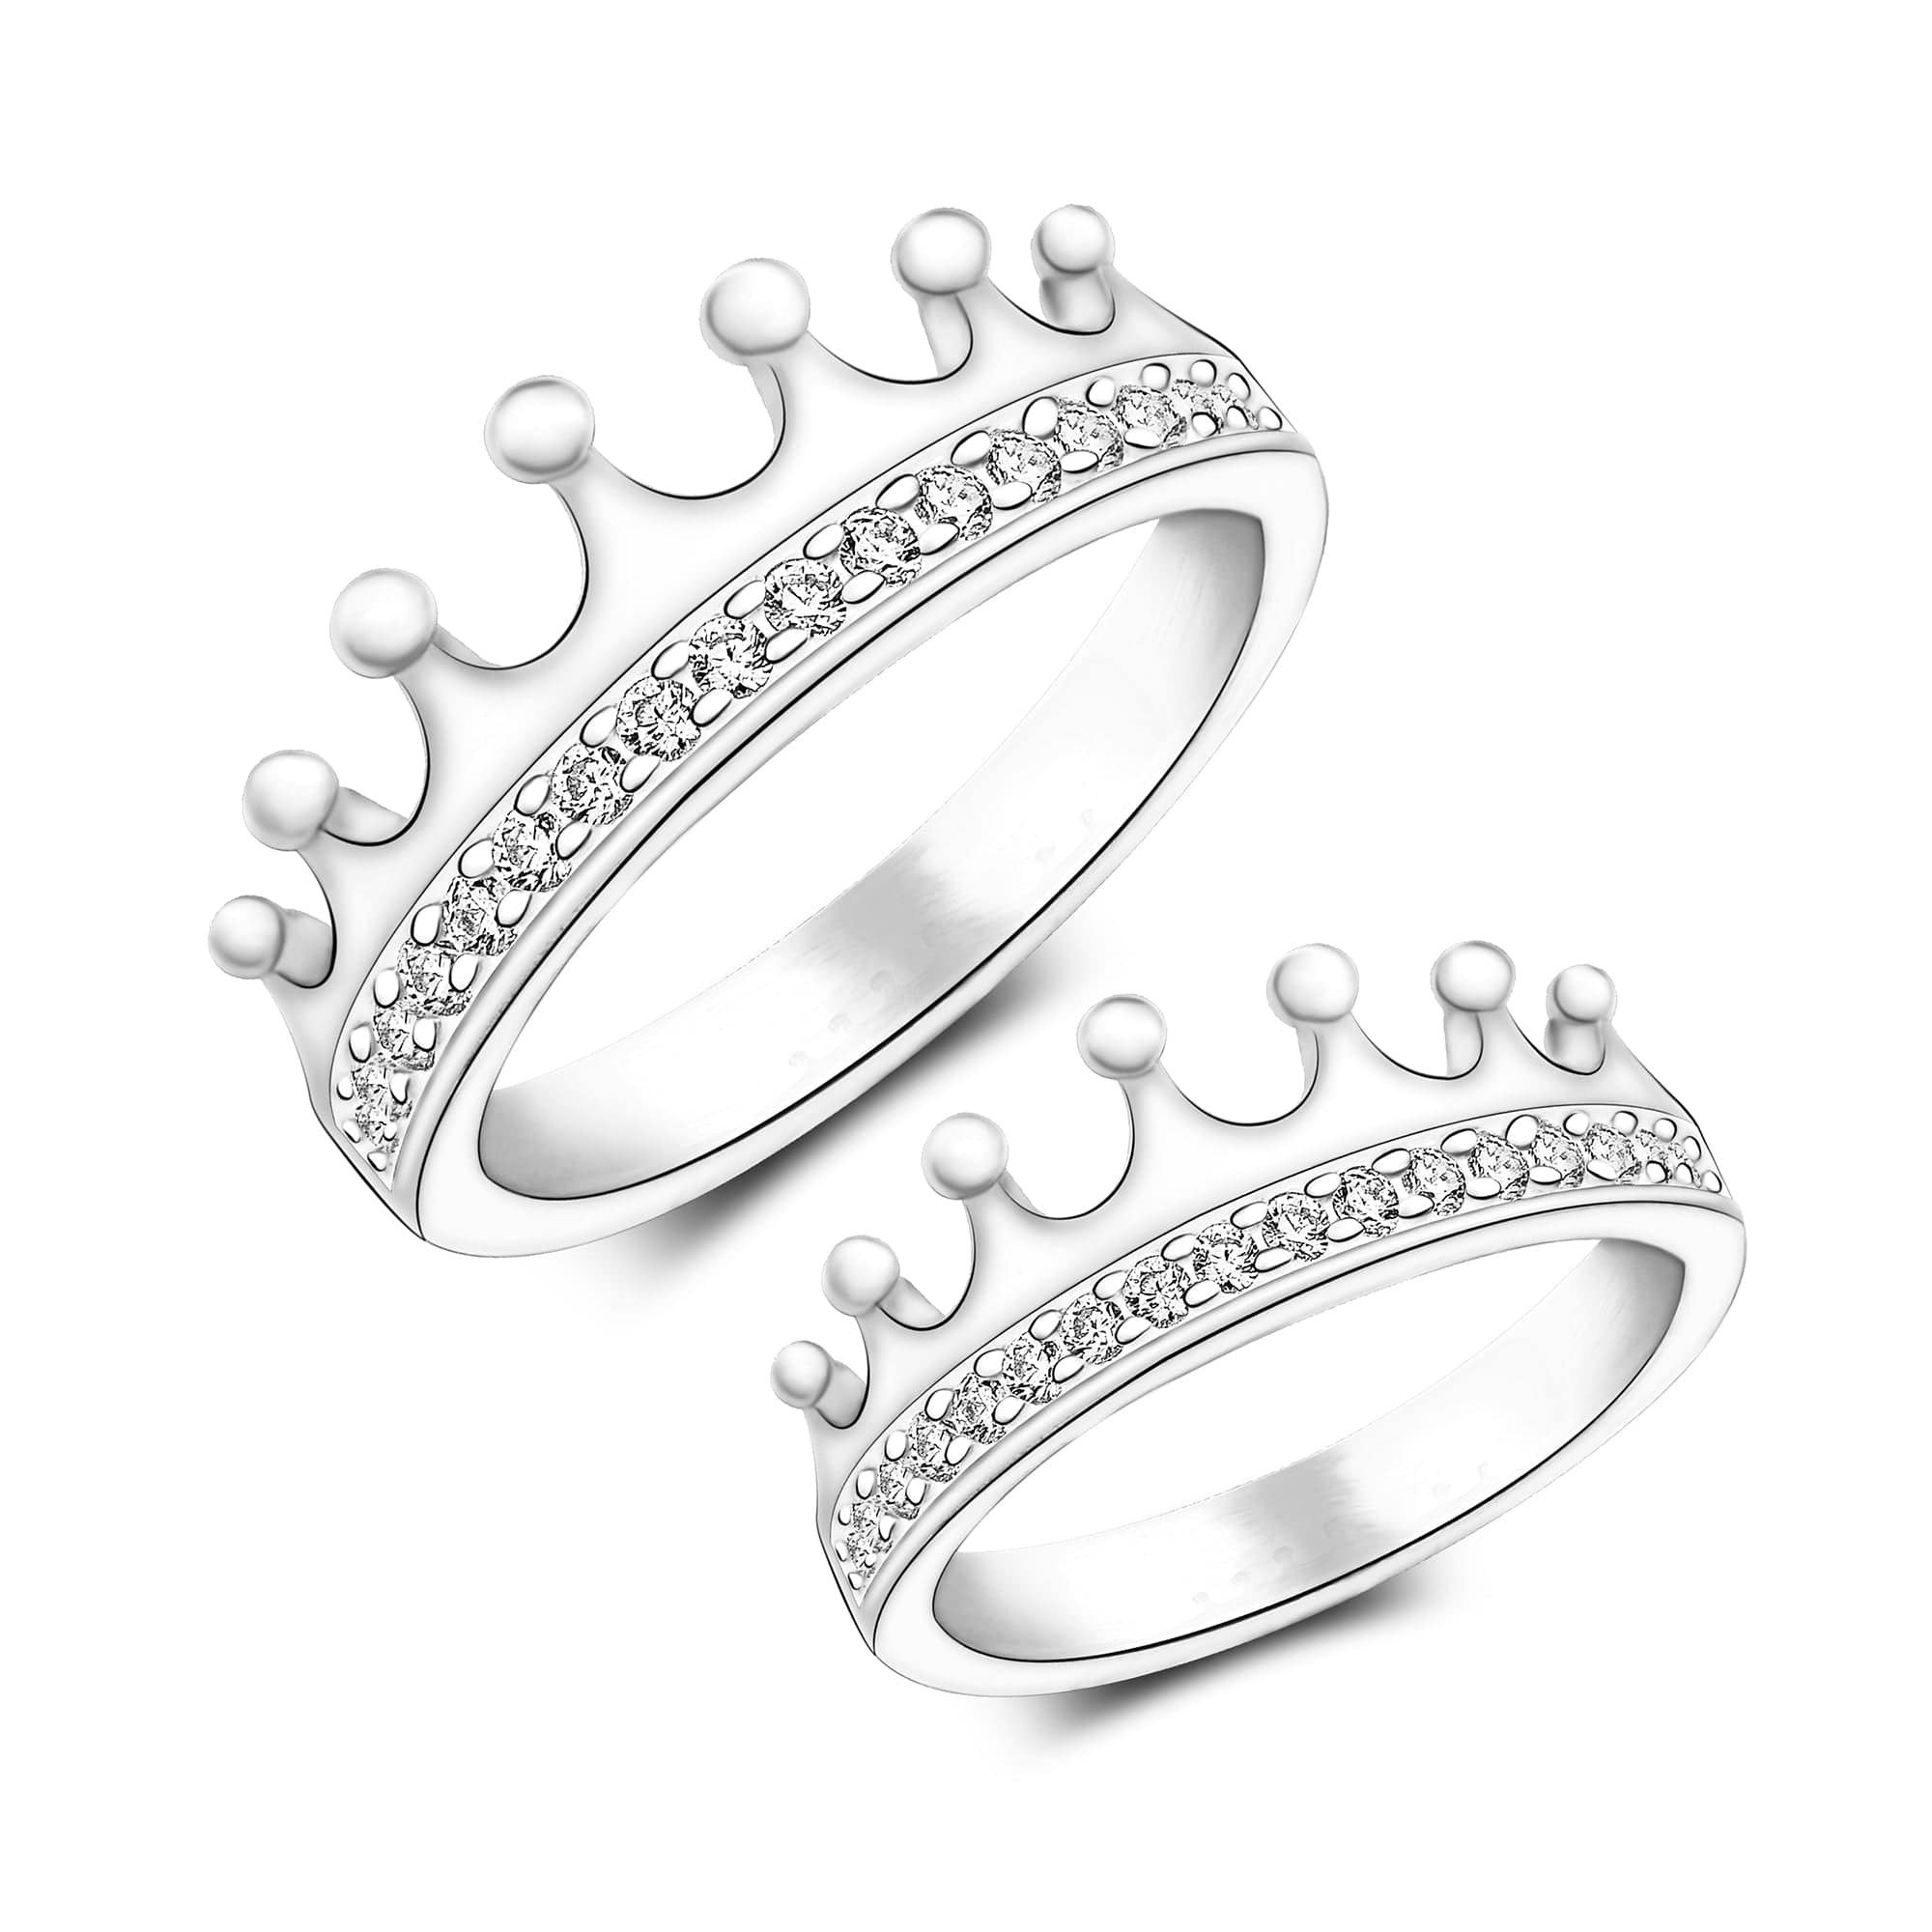 Buy KRELIN King & Queen Couple Rhinestone Rings For Lovers (Silver Color)  at Amazon.in